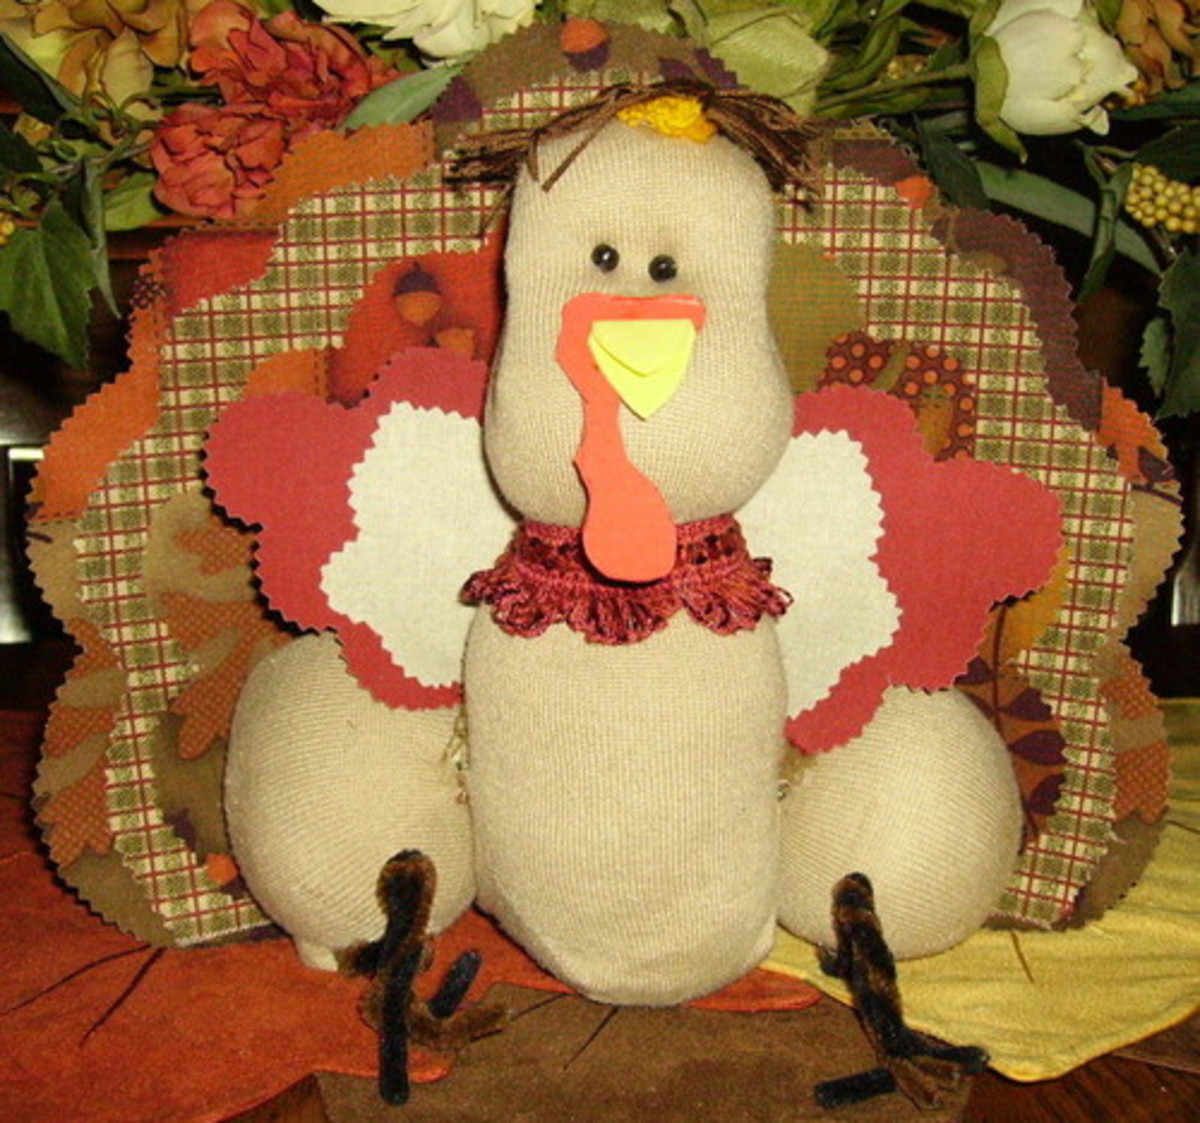 This turkey looks good enough to eat (almost). Read on to learn how you can make a centerpiece like this!